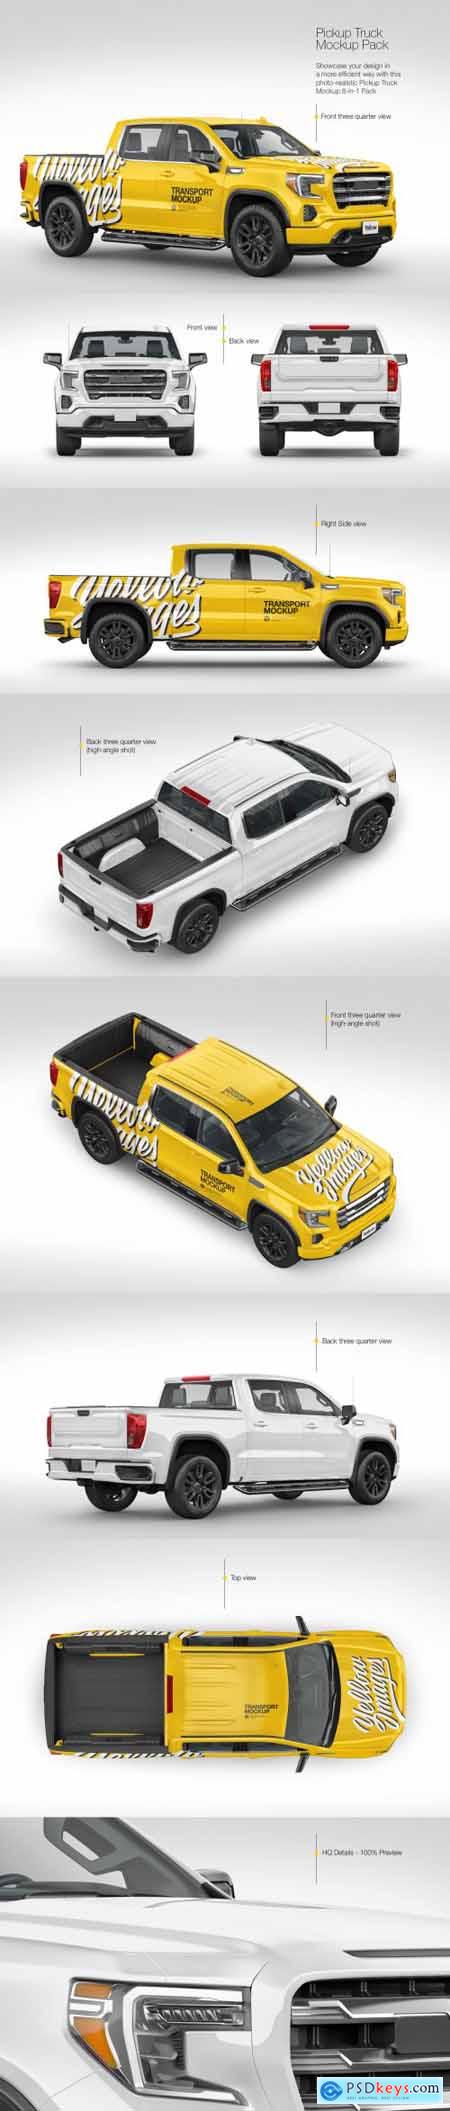 Download Pickup Truck Mockup Pack » Free Download Photoshop Vector ...